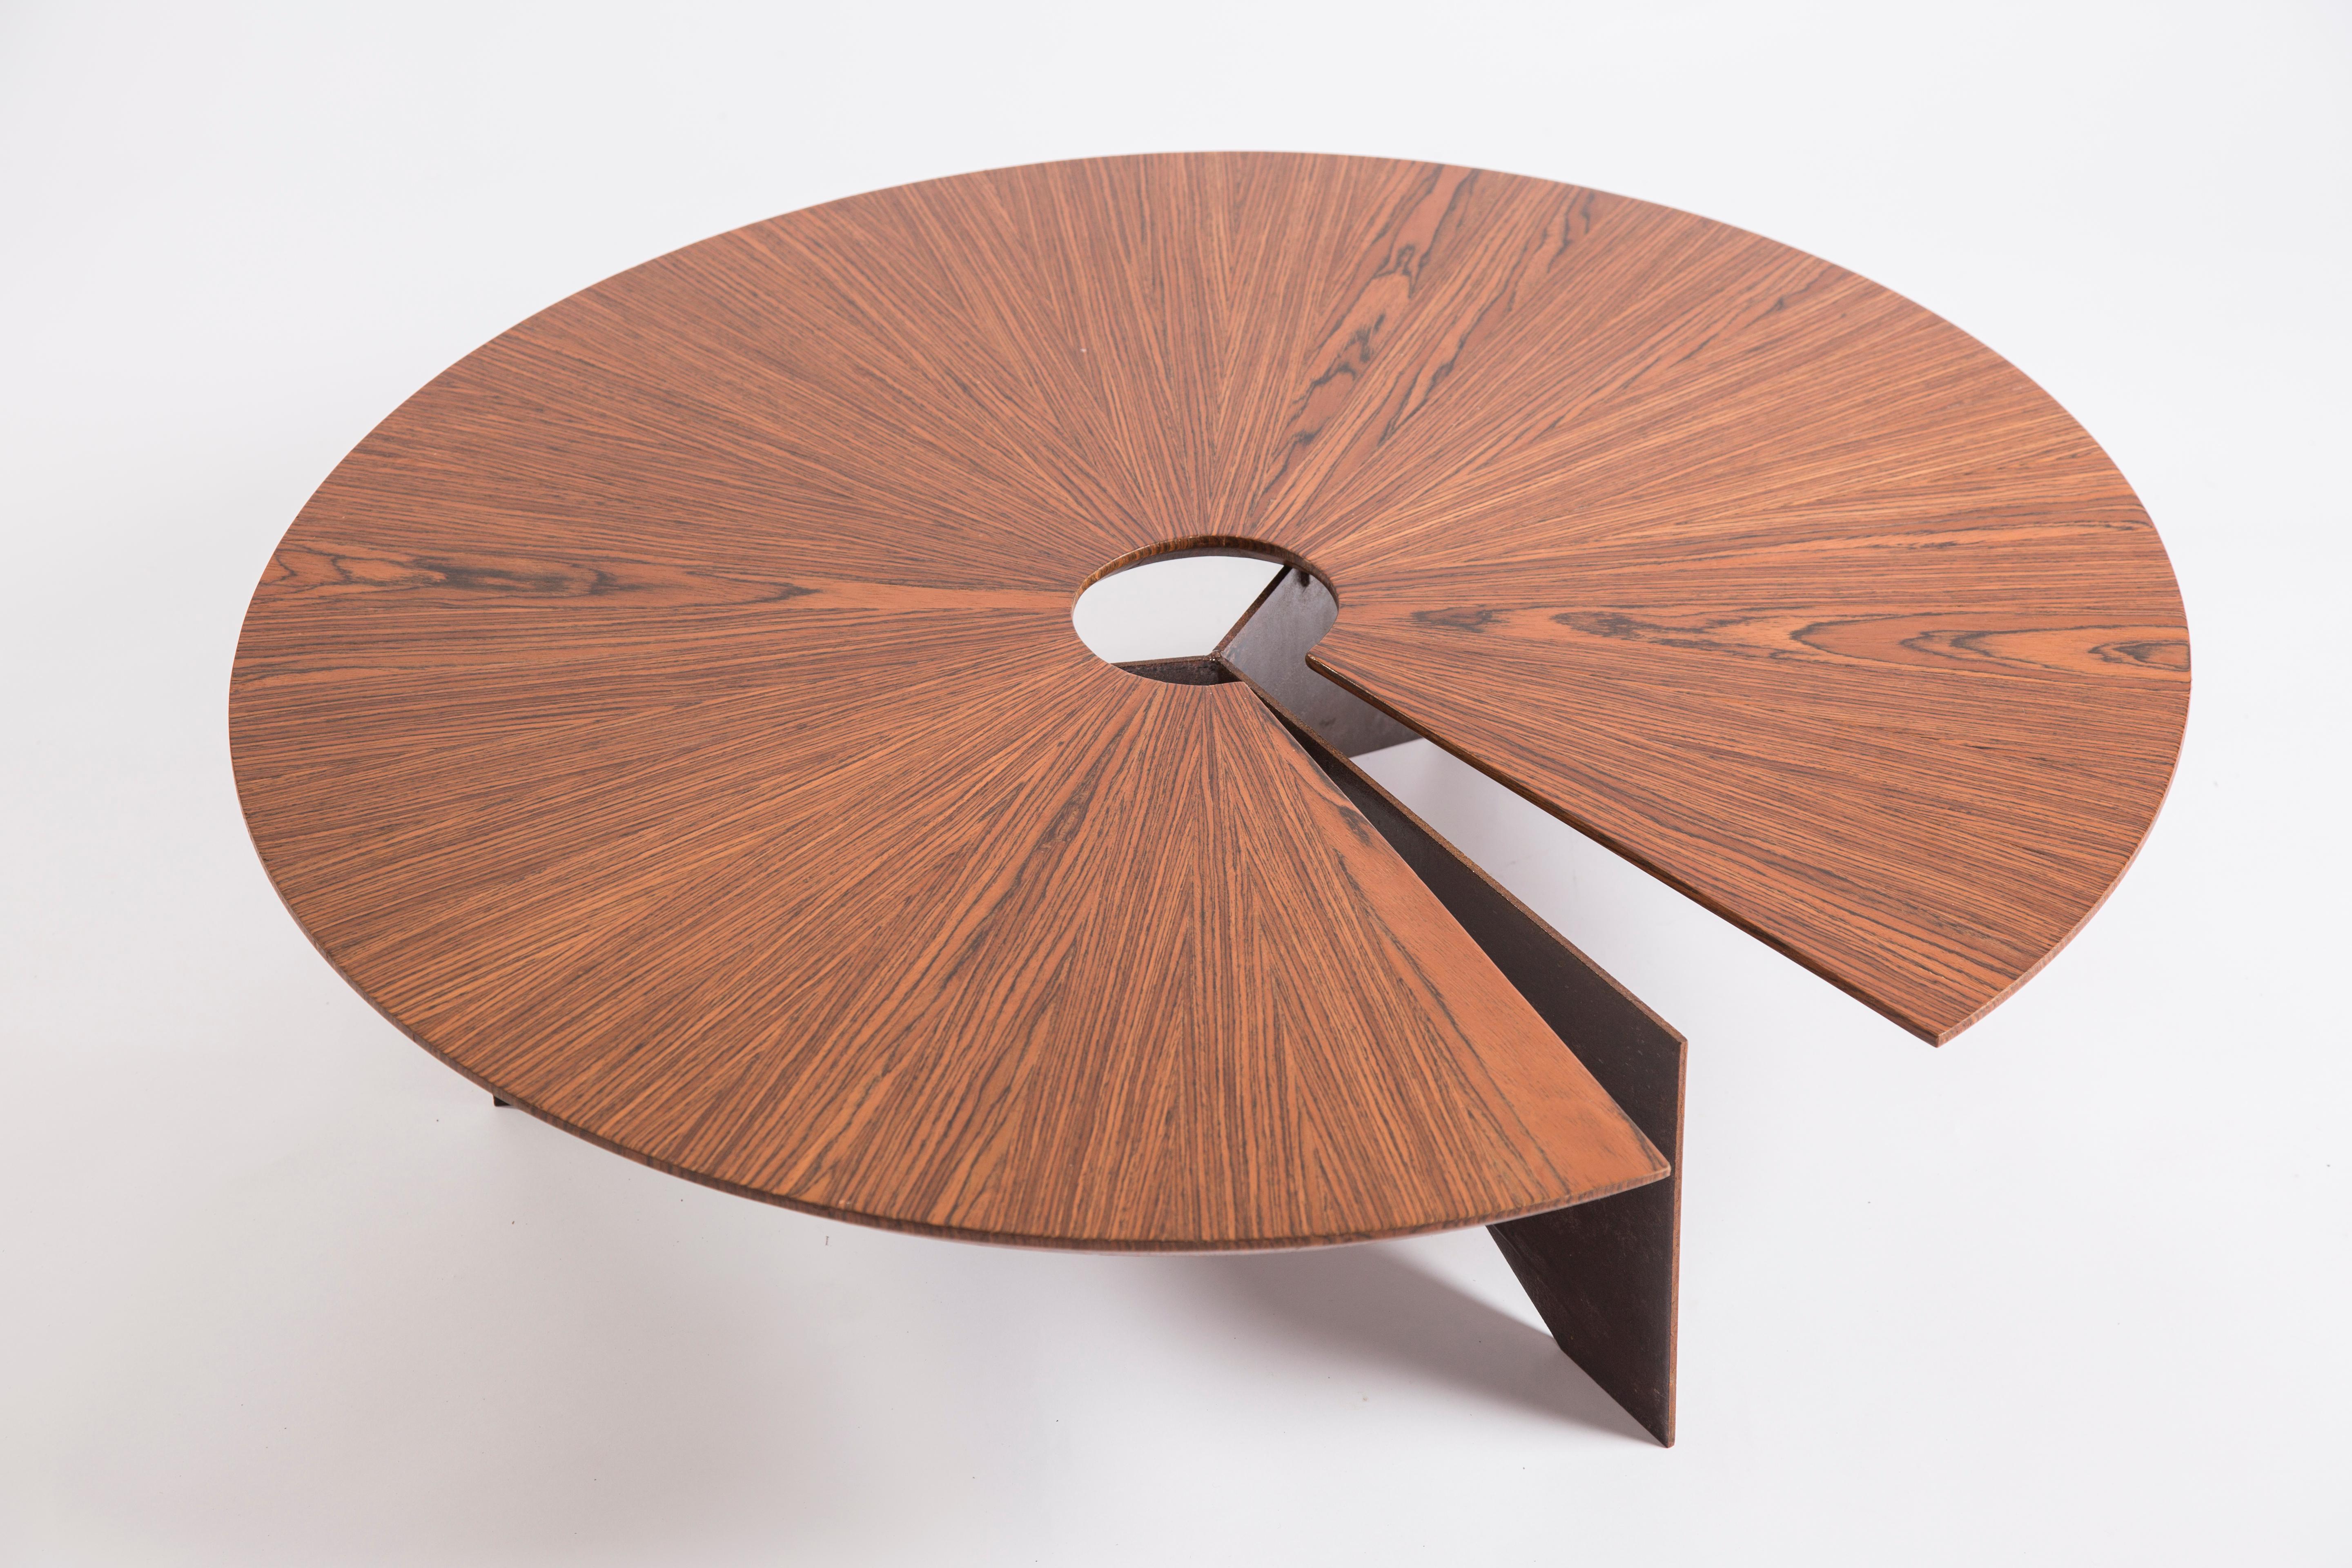 Brazilian Contemporary Round Coffee SS Table by Decarvalho Atelier